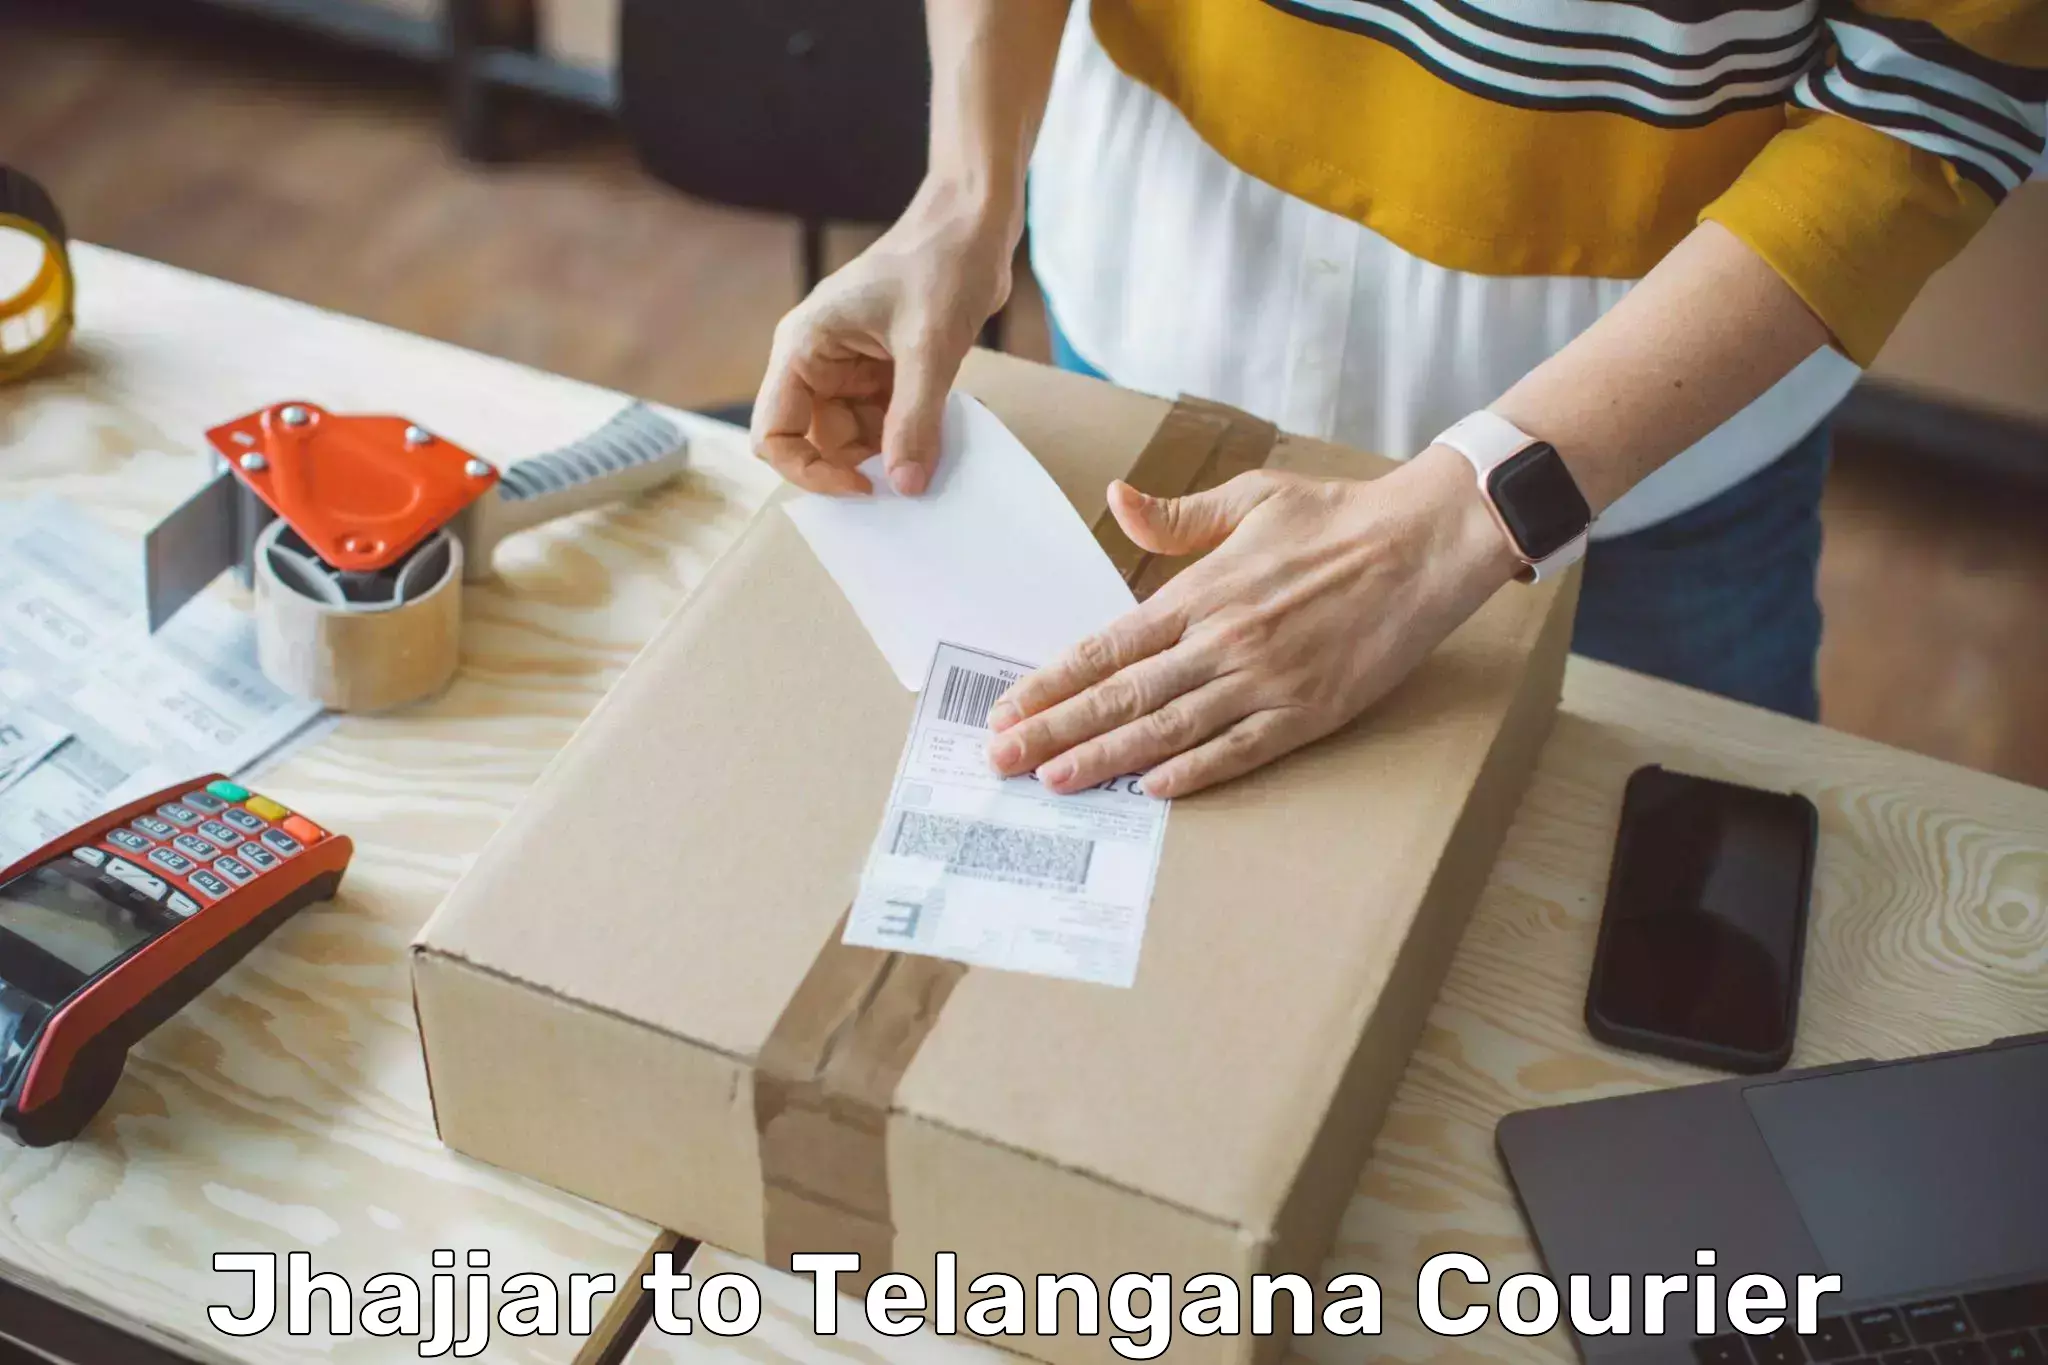 Courier service comparison Jhajjar to Secunderabad